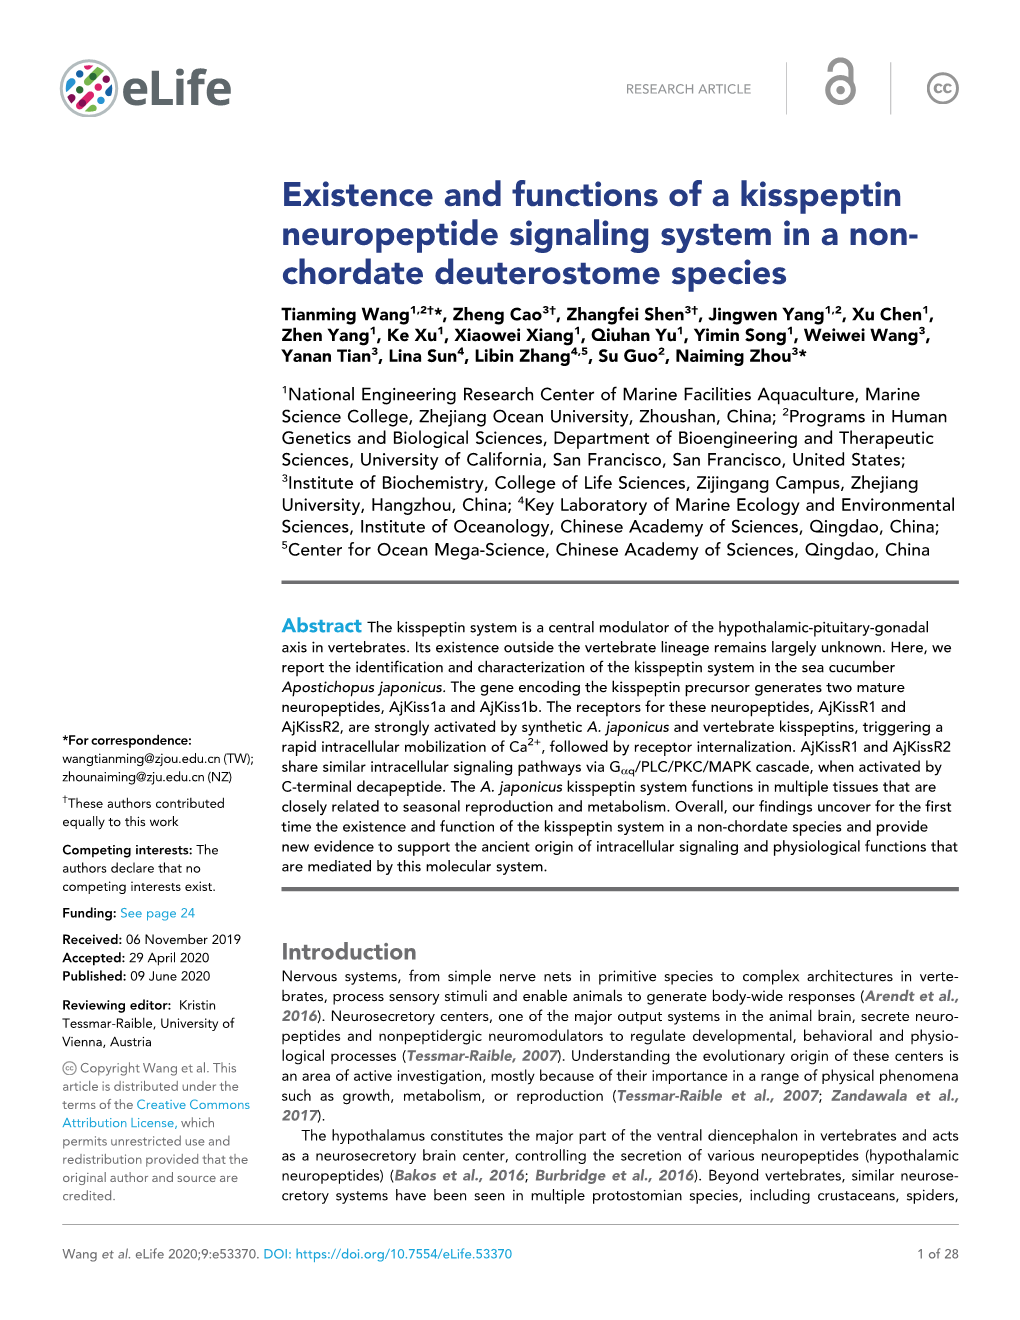 Existence and Functions of a Kisspeptin Neuropeptide Signaling